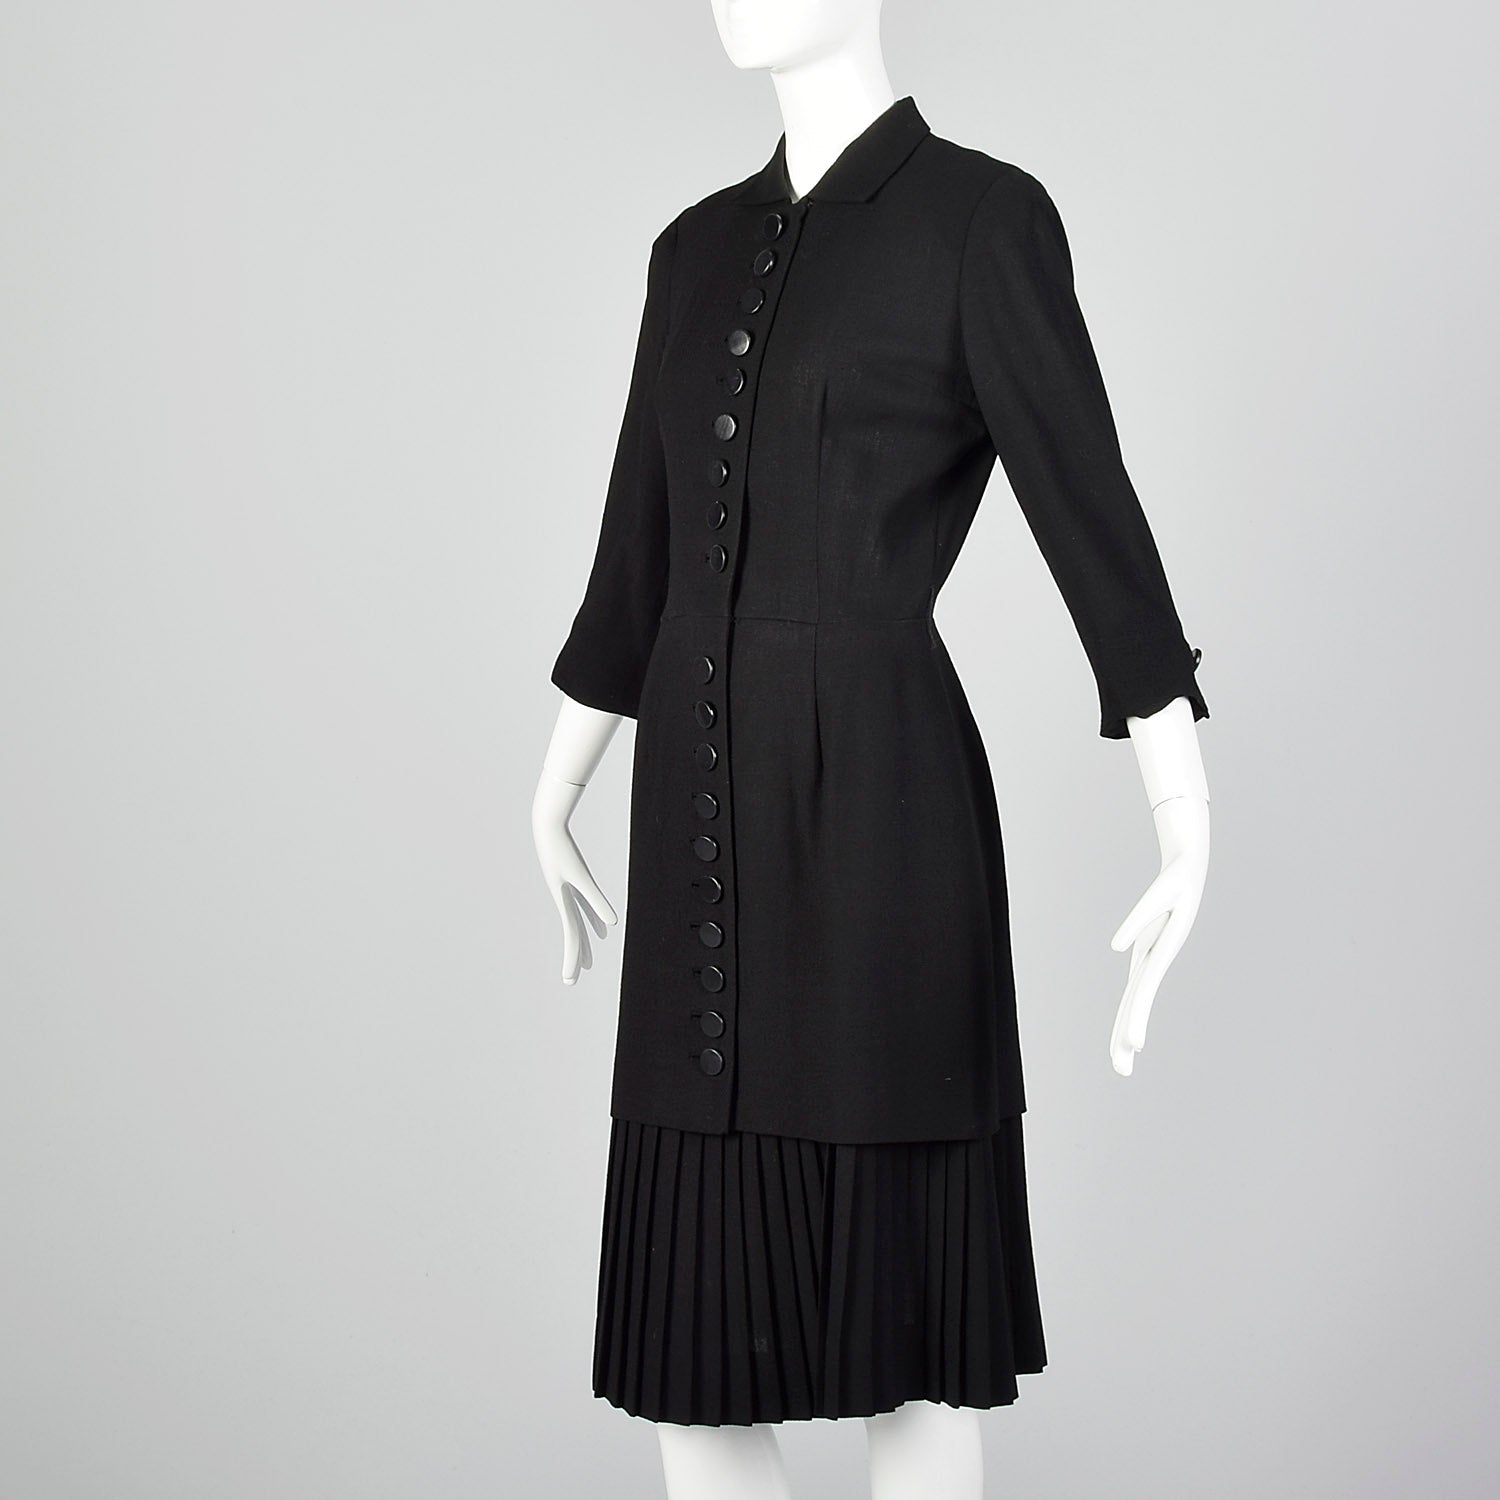 Small 1950s Black Dress with Pleated Underlay